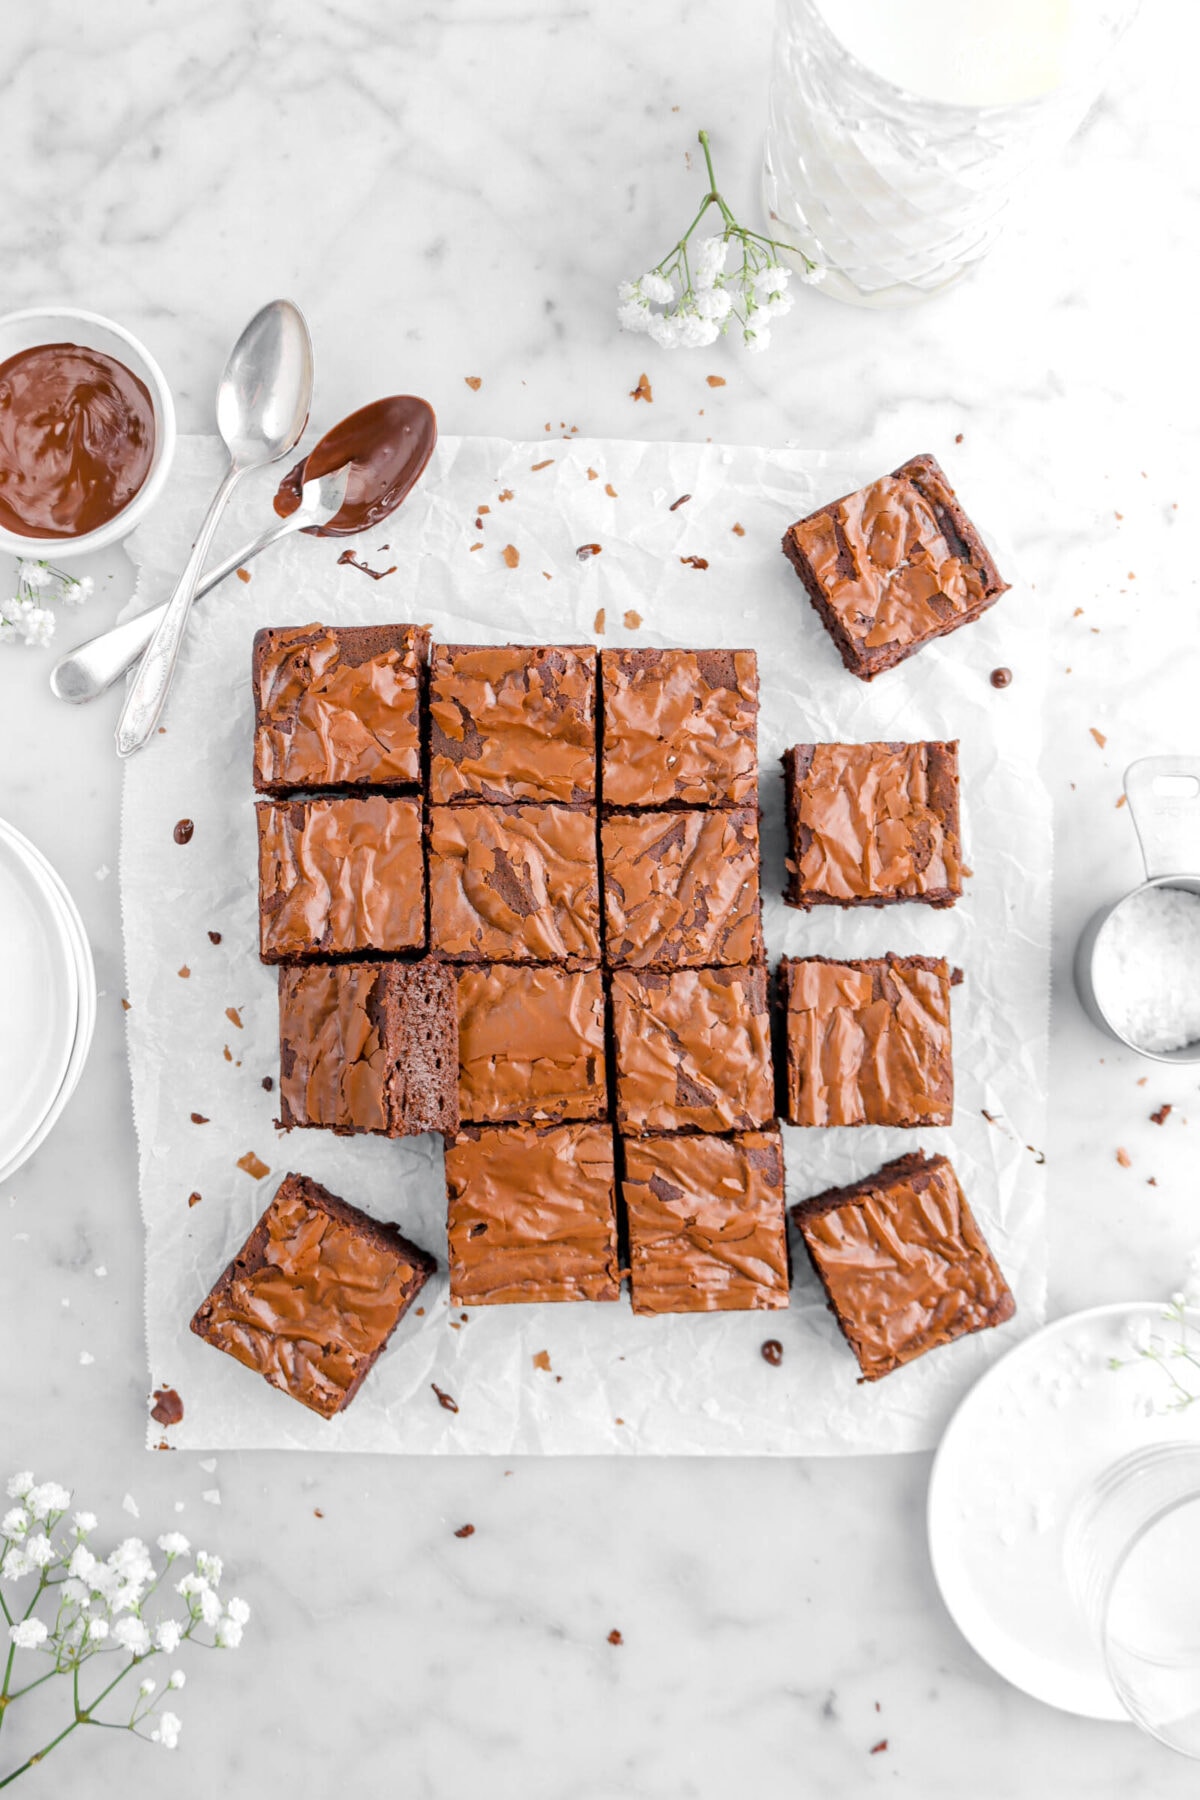 sixteen brownies on parchment paper with bowl of melted chocolate and two spoons beside, glass of milk, measuring cup of salt, and plates on marble surface